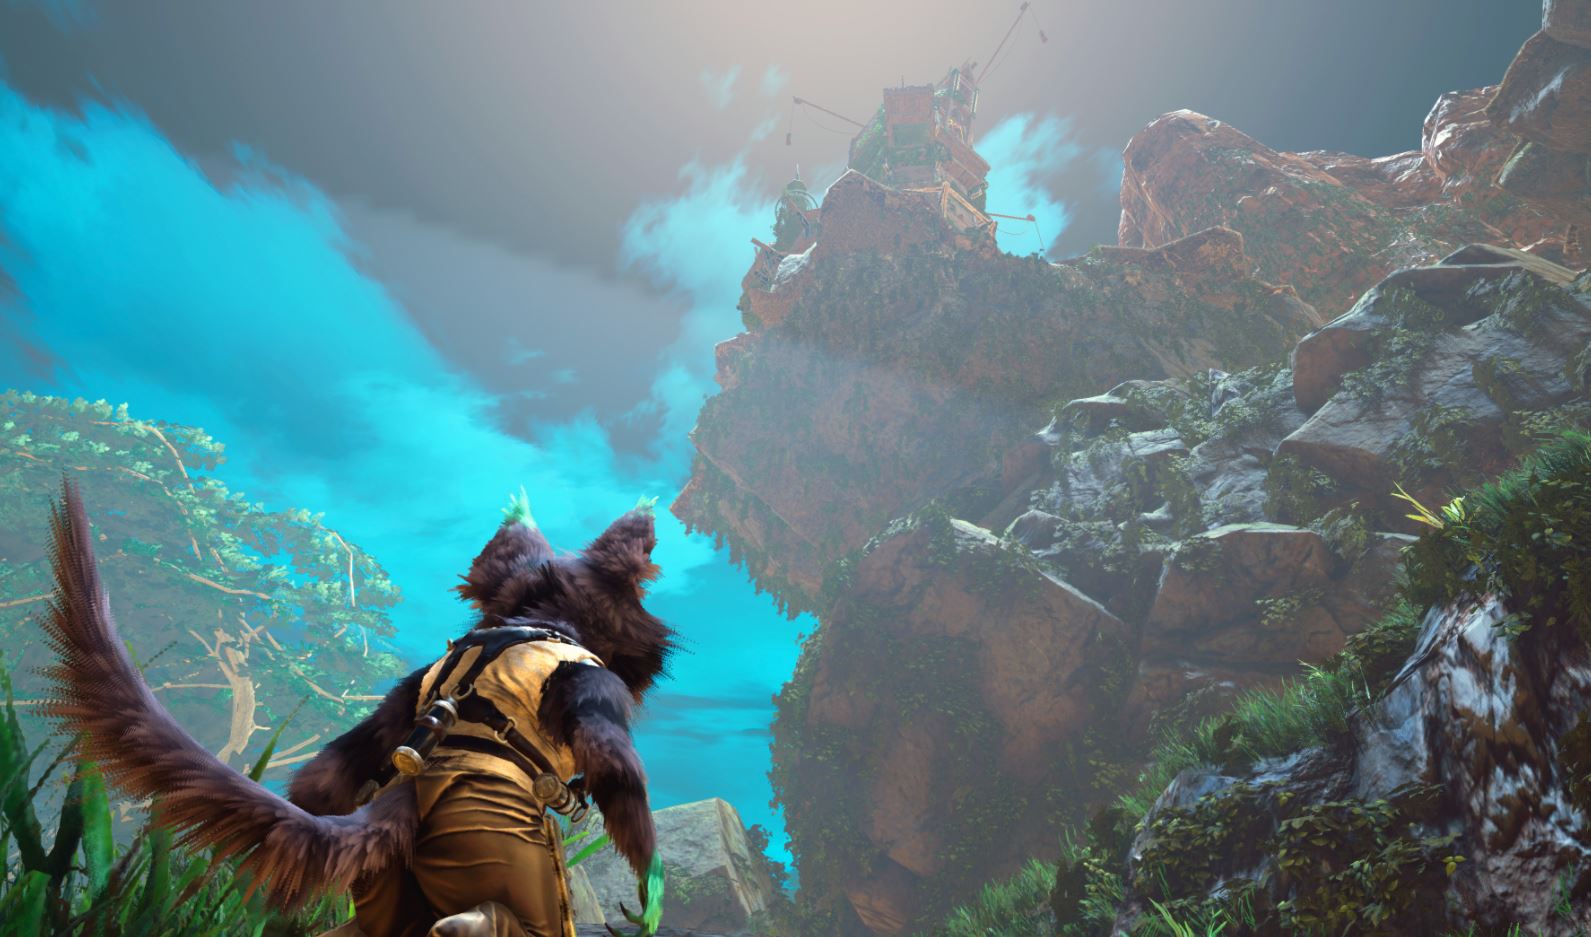 biomutants-latest-trailer-showcases-the-world-you-can-explore-when-the-game-releases-next-month